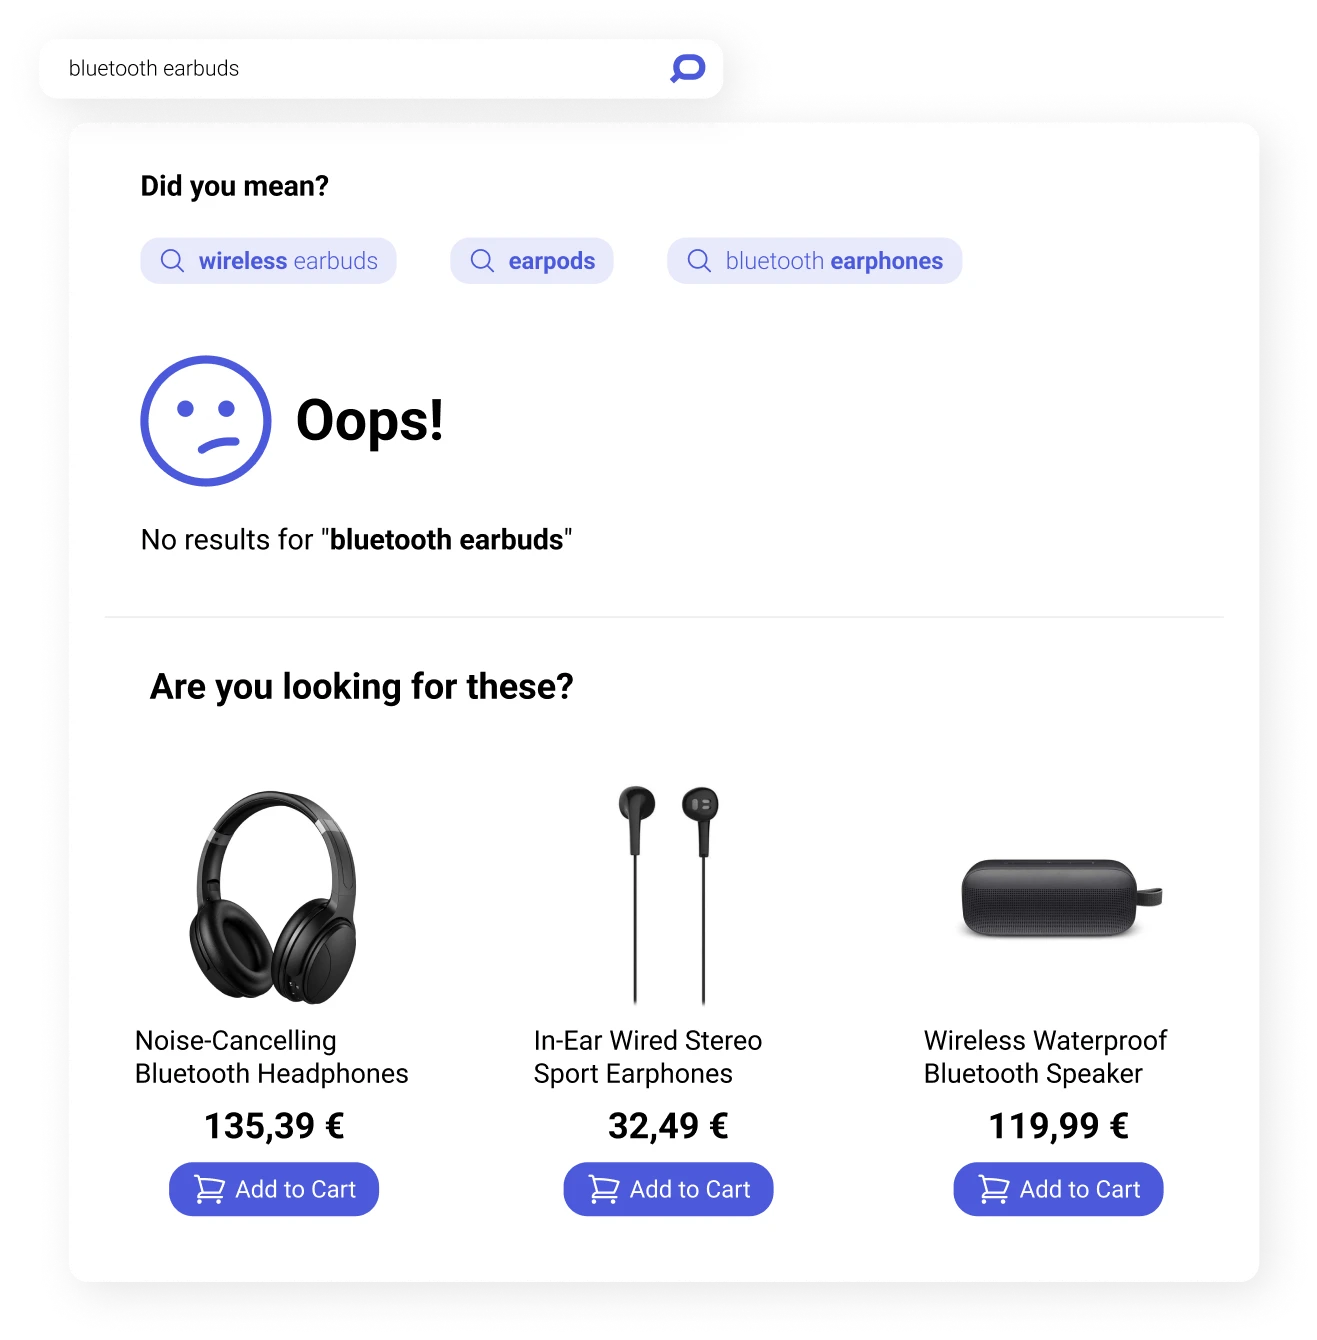 Related Products appear in the search box to help shoppers reformulate their query by selecting alternative products related to their initial search intent.